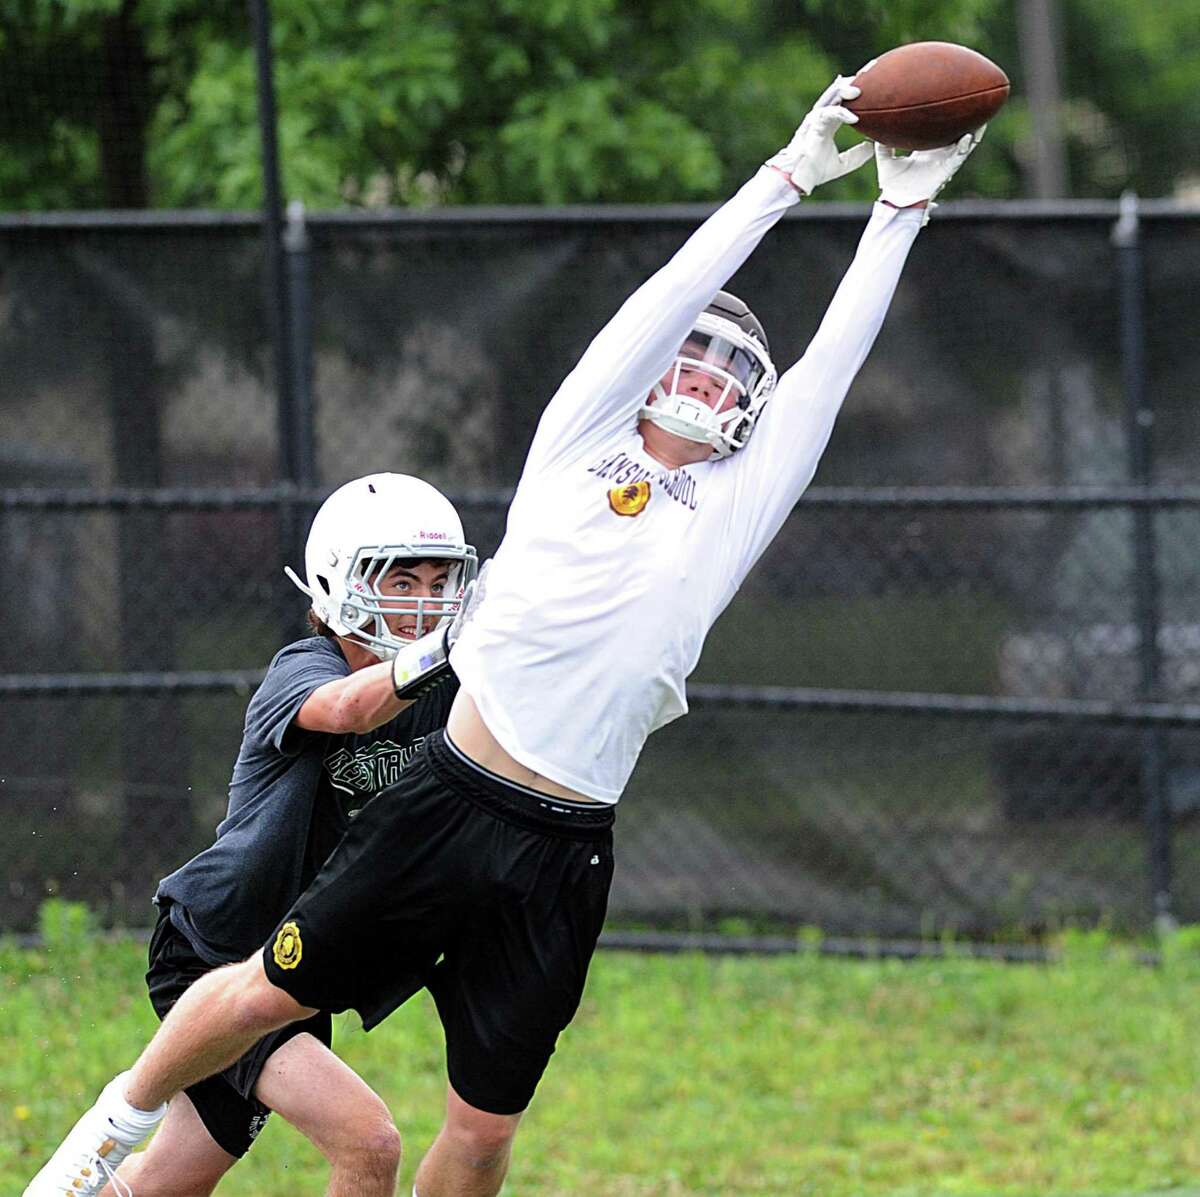 Brunswick School receiver Sean Amill makes a catch during the Grip It & Rip It football tournament at New Canaan High School, New Canaan, Conn., Saturday, July, 8, 2017.